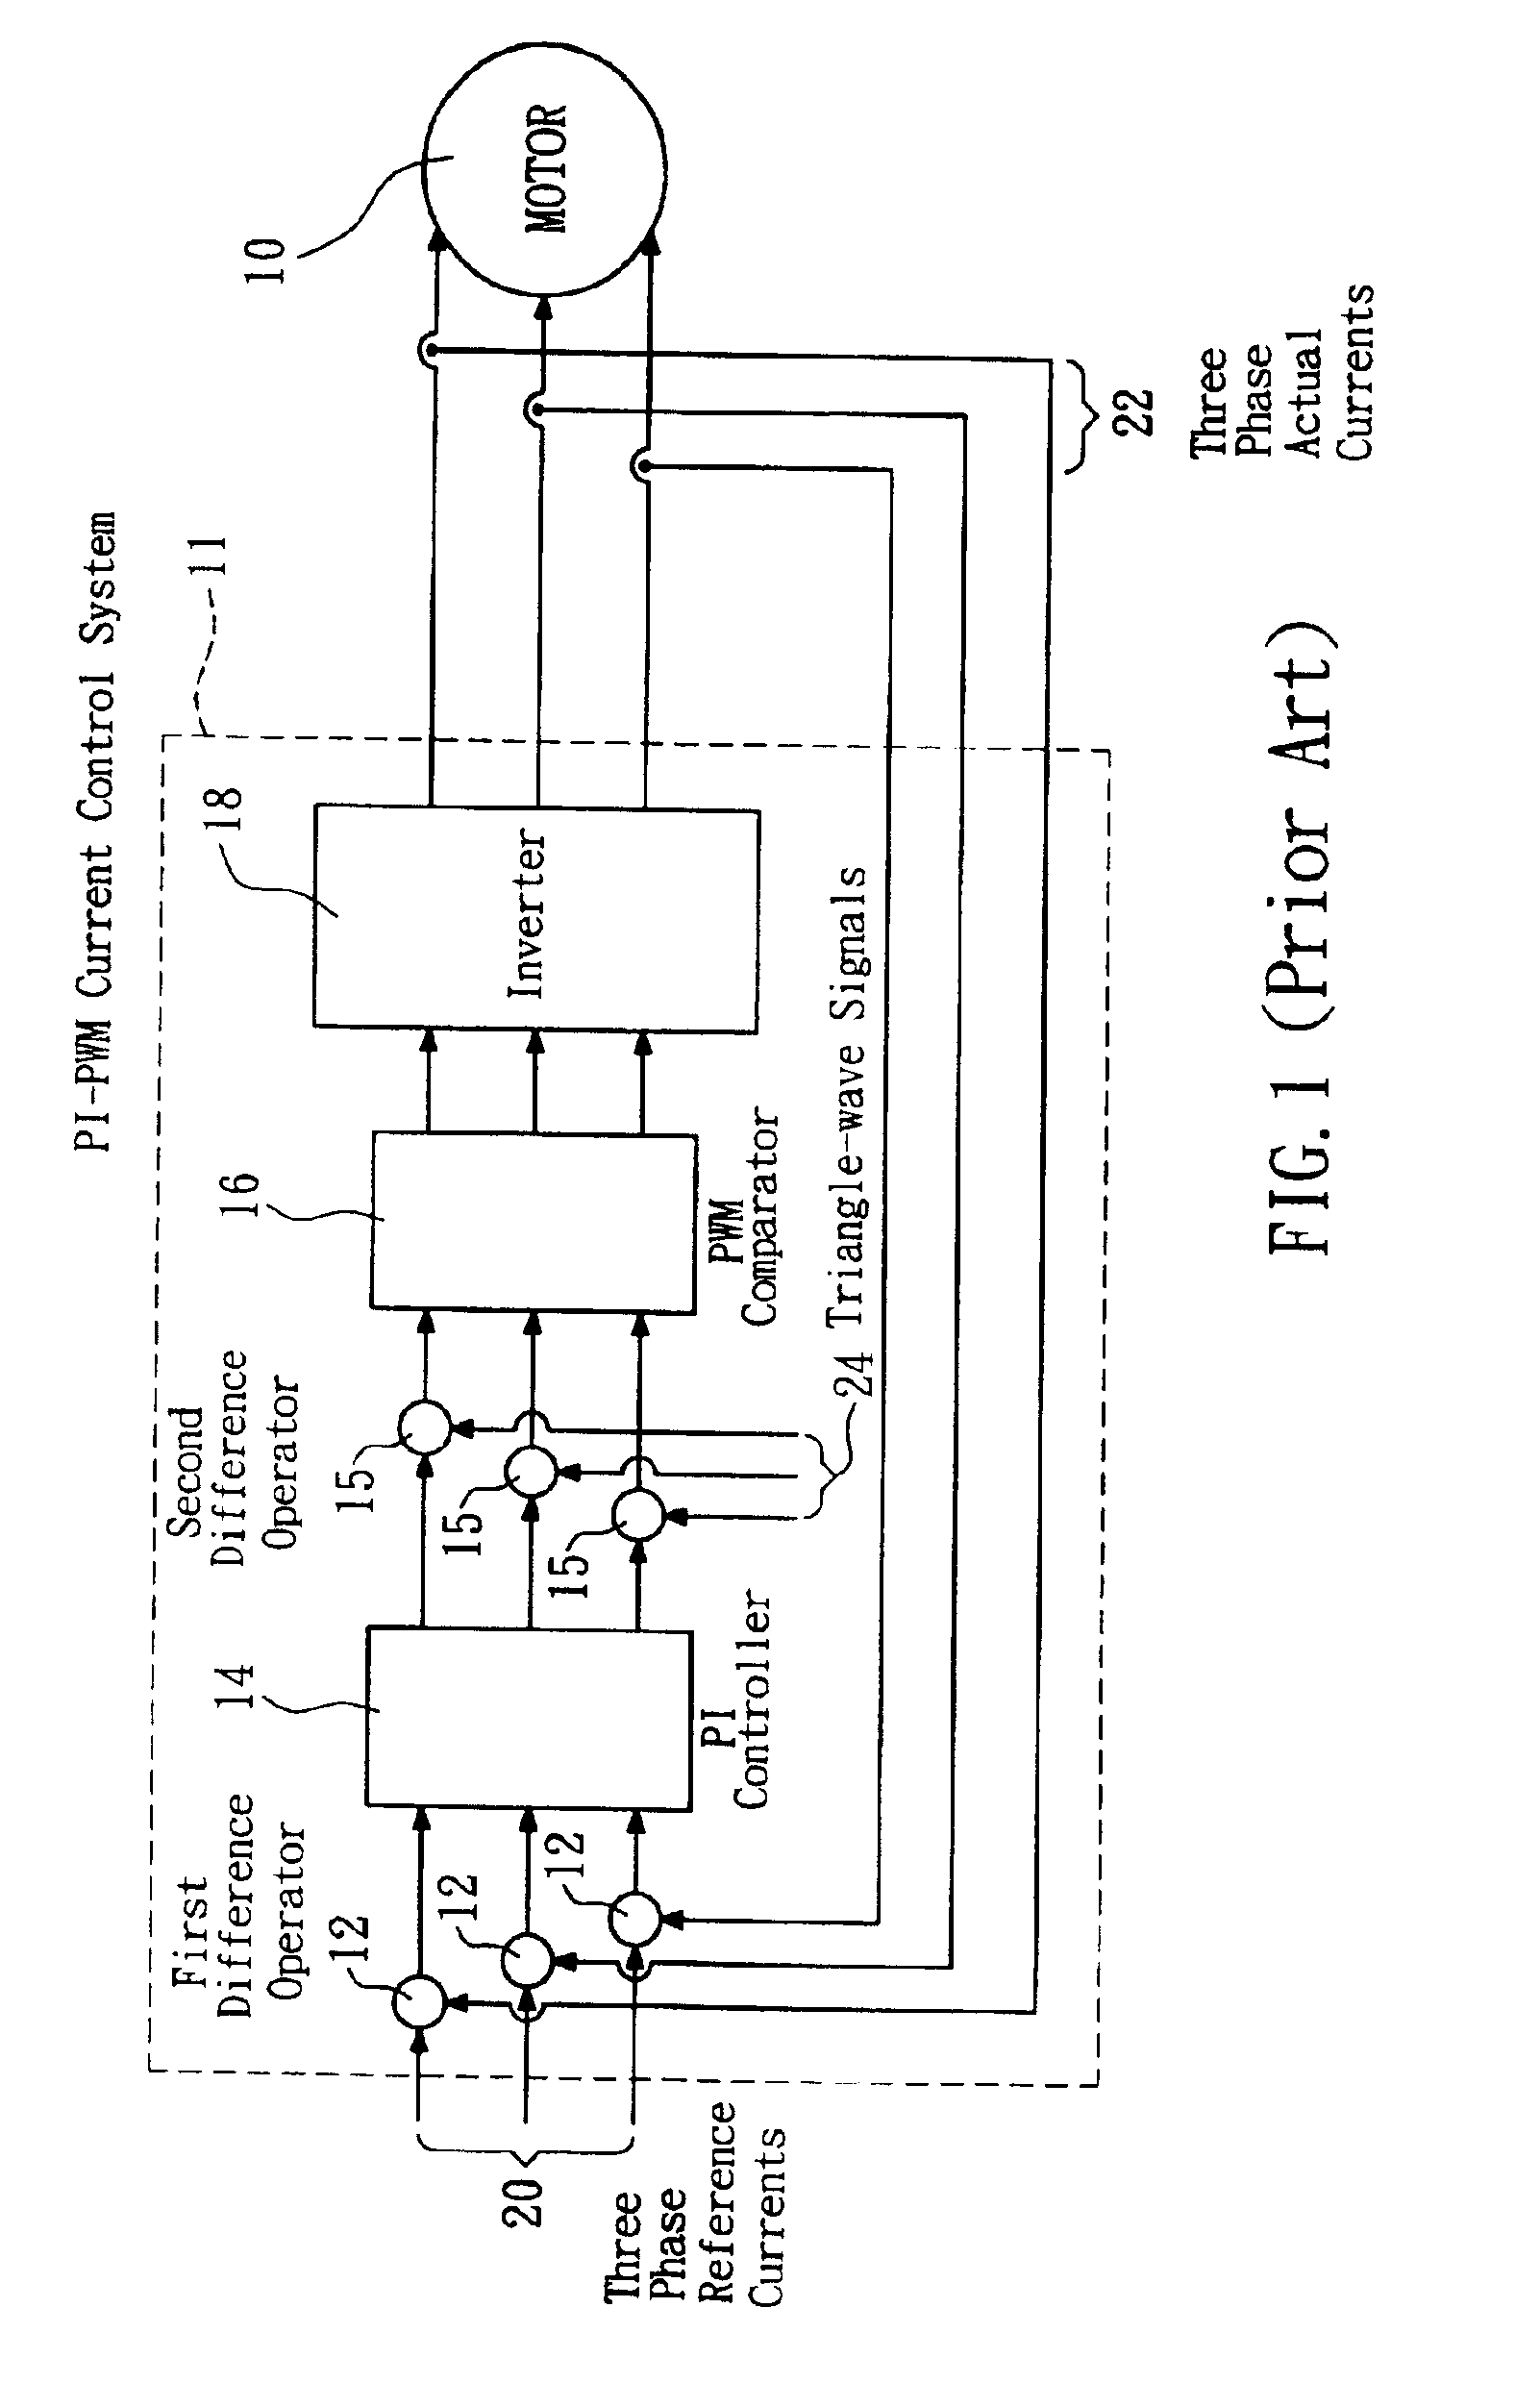 Control method and system for motor